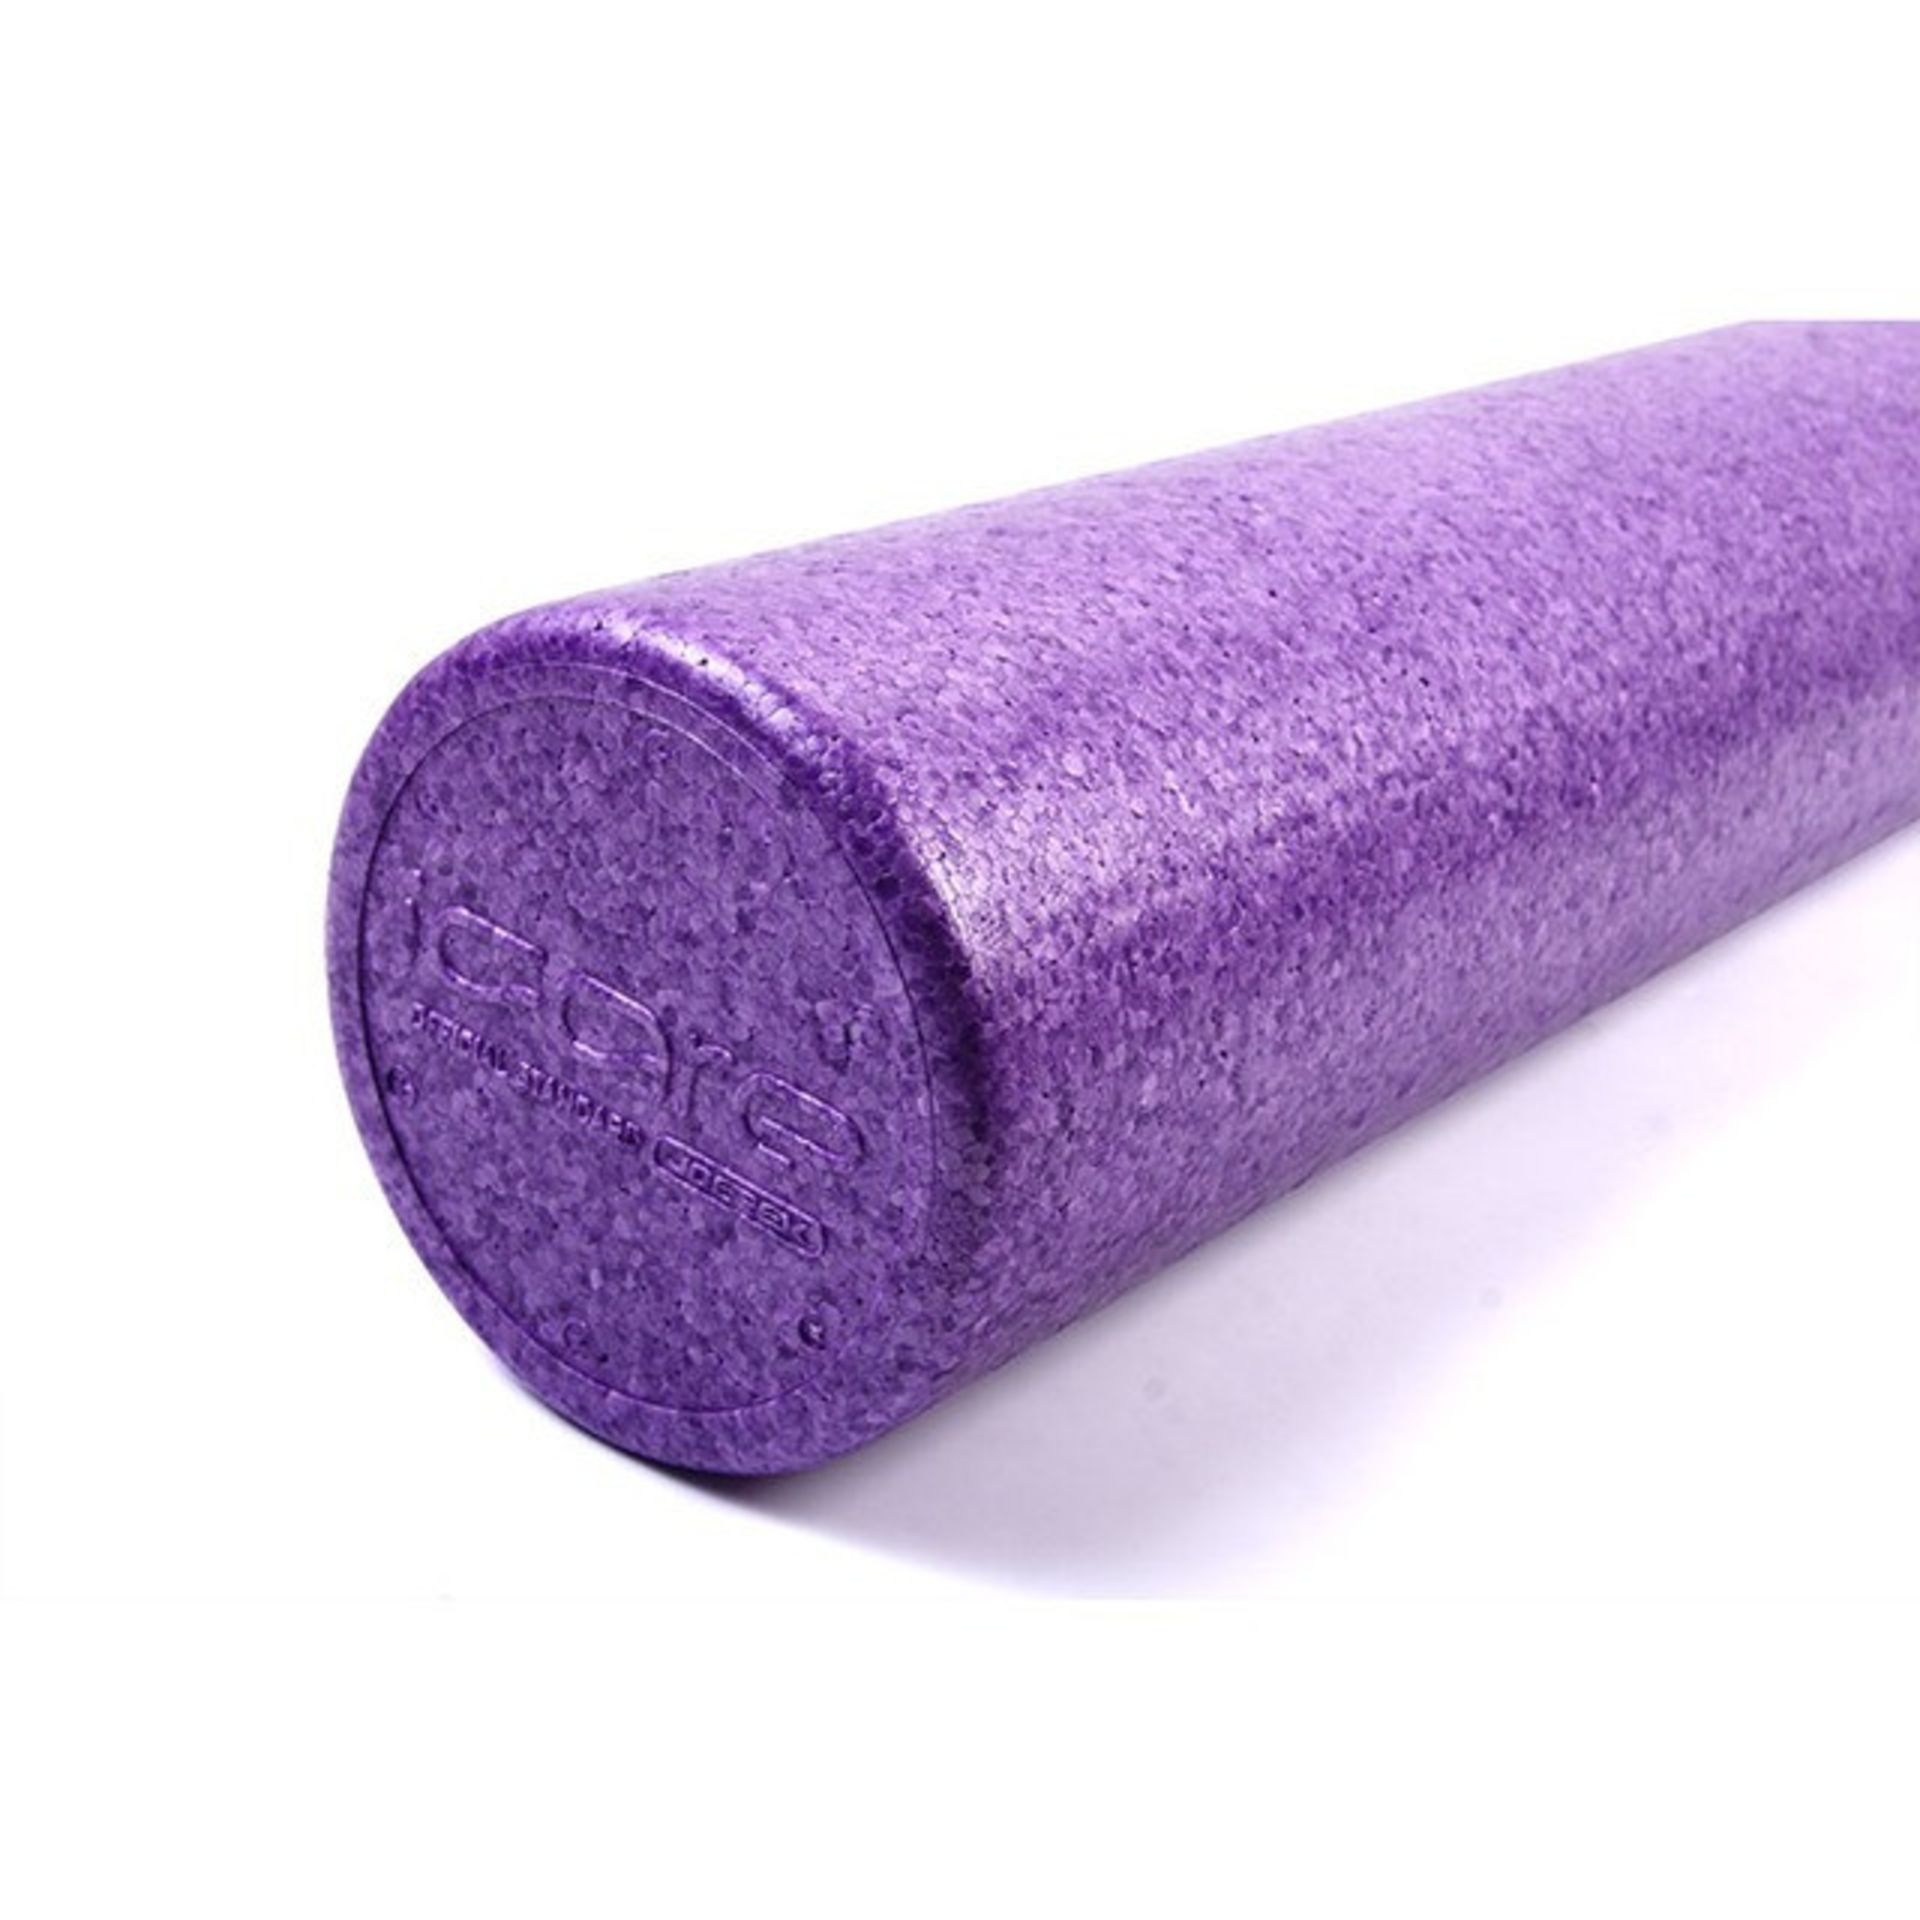 [NEW] Yoga roller I.CARE 90 x 15 cm - Image 2 of 2